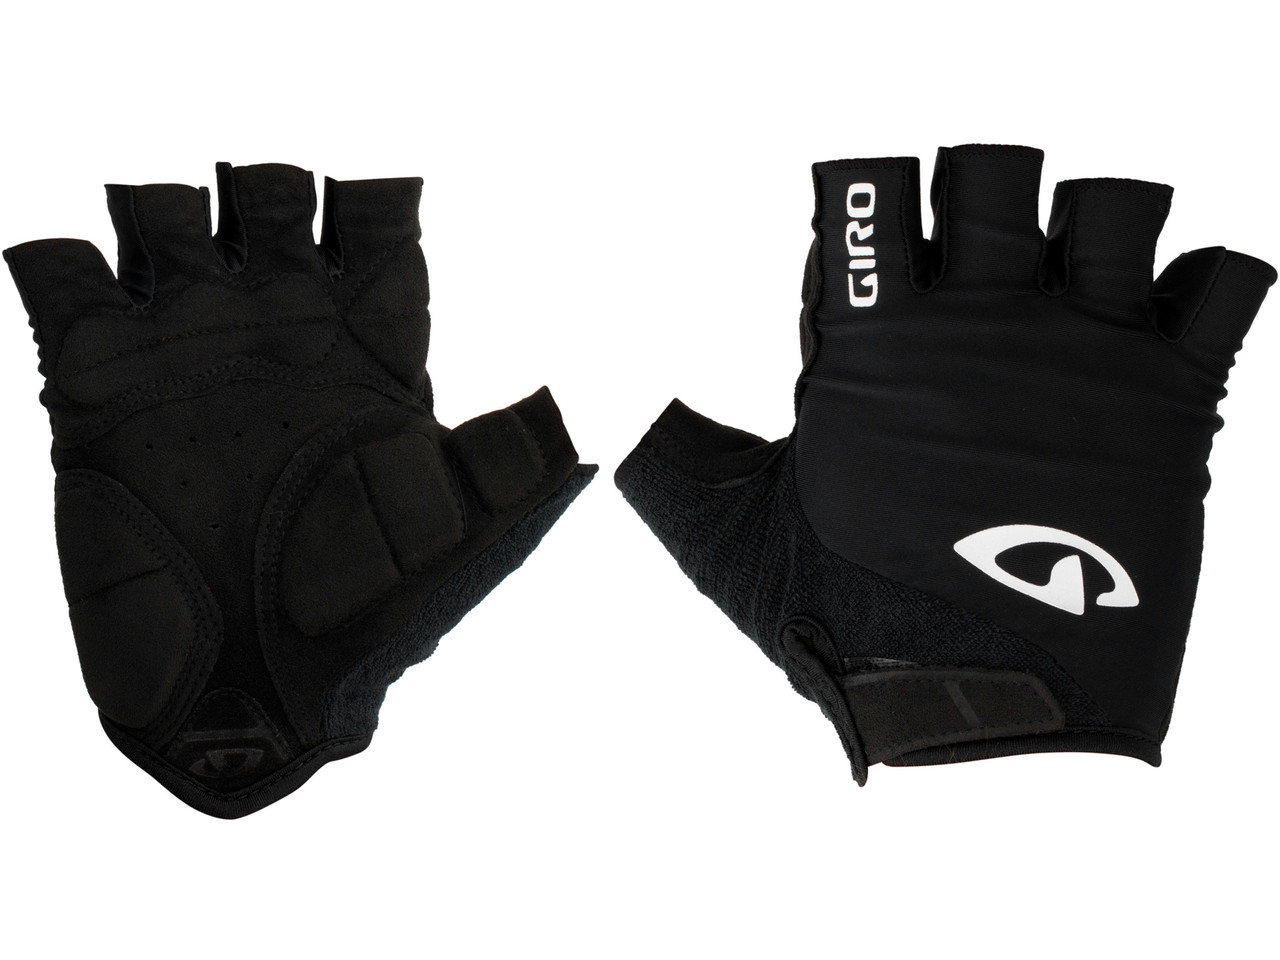 57% on all Special Style Giro Jag Gloves - shop now!